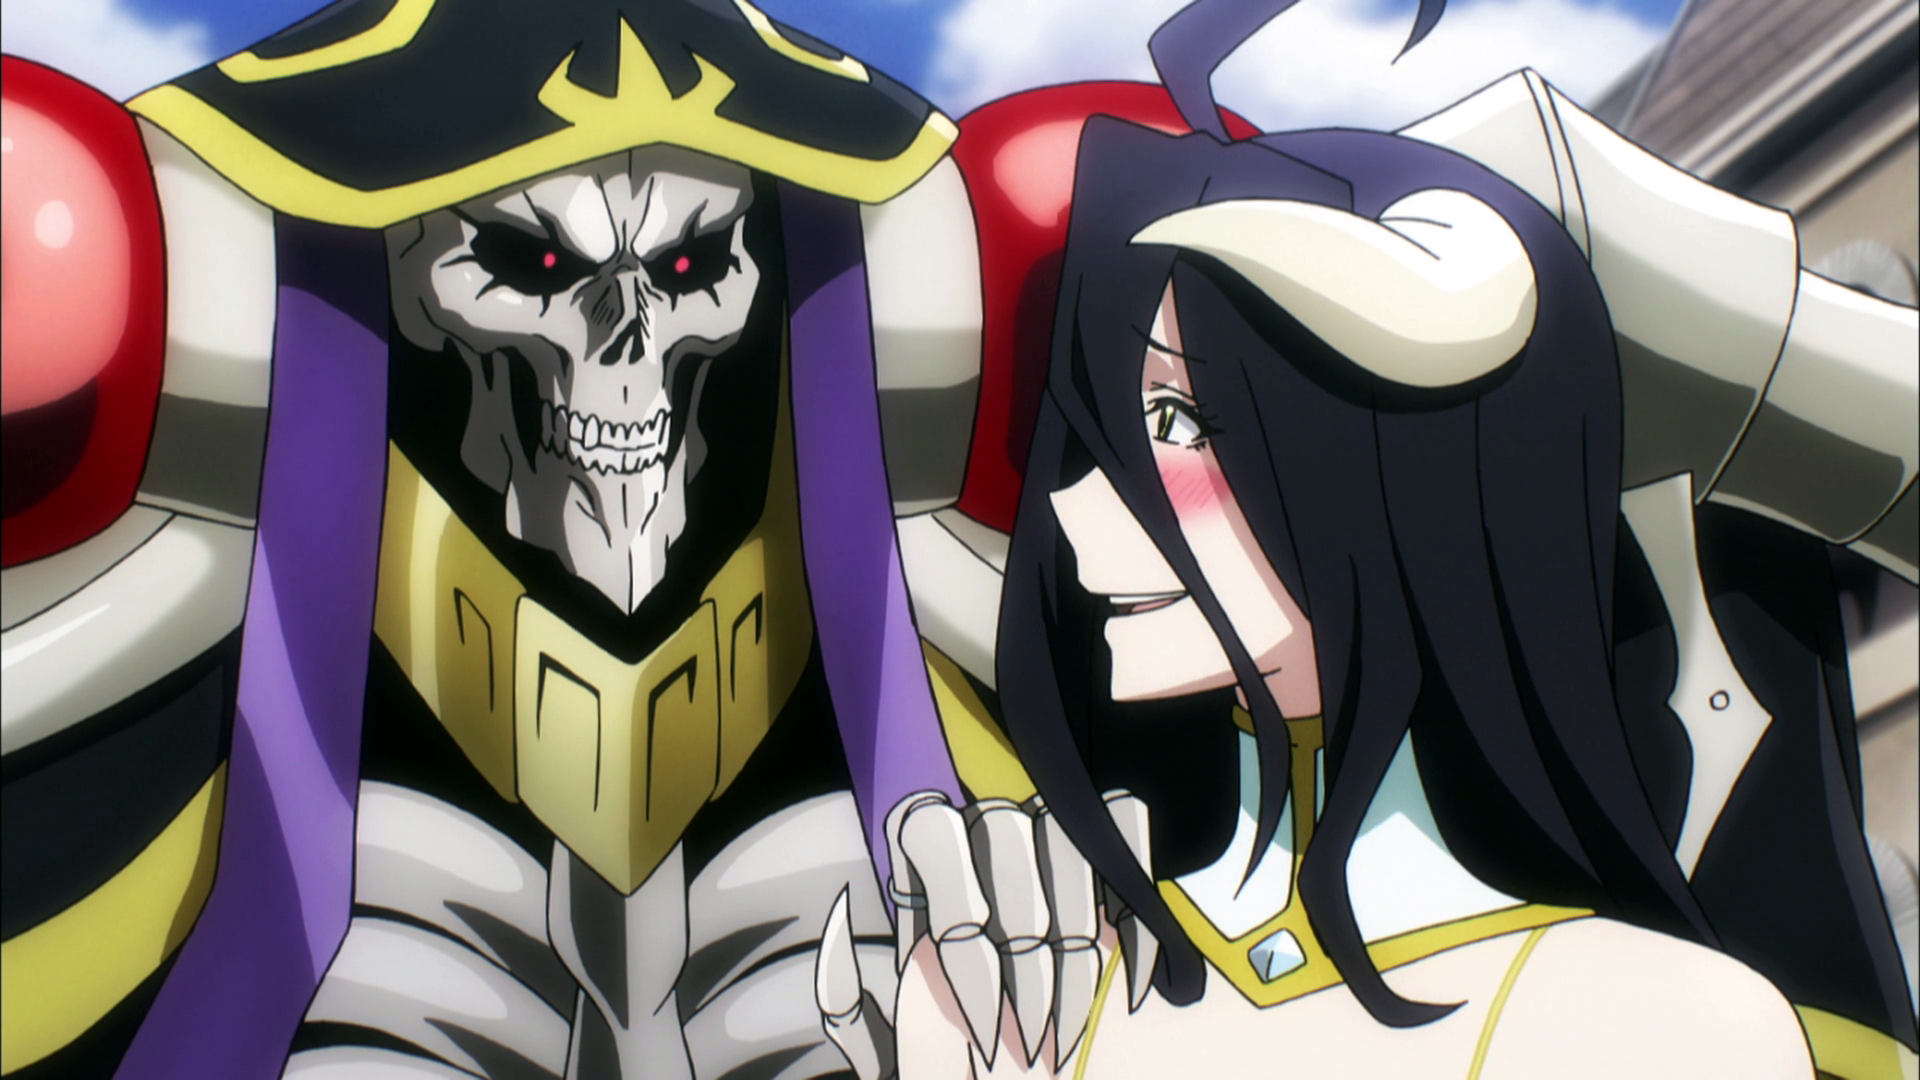 Download Albedo Overlord Ainz Ooal Gown Anime Overlord Hd Wallpaper